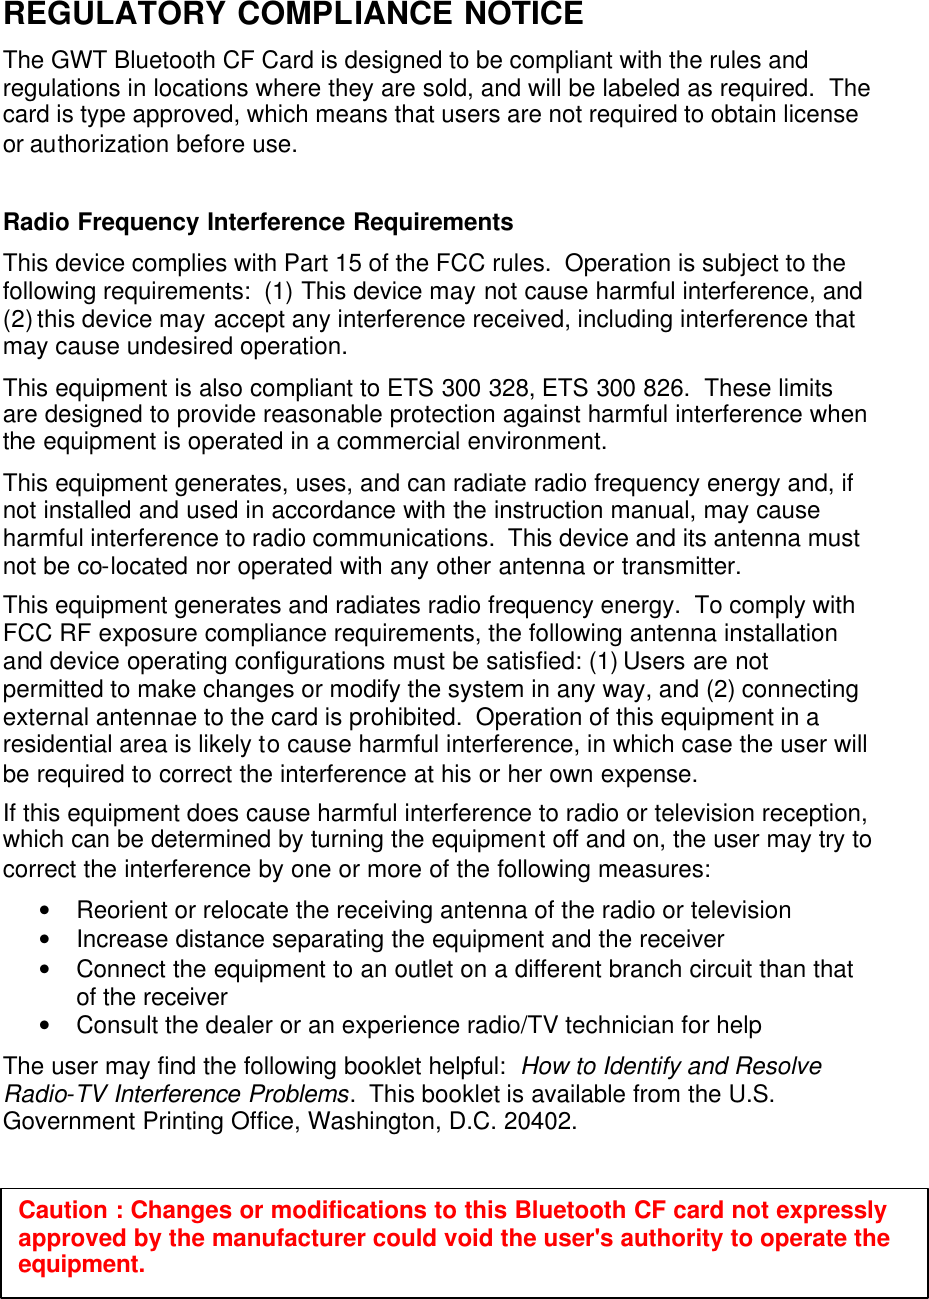 REGULATORY COMPLIANCE NOTICE The GWT Bluetooth CF Card is designed to be compliant with the rules and regulations in locations where they are sold, and will be labeled as required.  The card is type approved, which means that users are not required to obtain license or authorization before use.  Radio Frequency Interference Requirements This device complies with Part 15 of the FCC rules.  Operation is subject to the following requirements:  (1) This device may not cause harmful interference, and (2) this device may accept any interference received, including interference that may cause undesired operation. This equipment is also compliant to ETS 300 328, ETS 300 826.  These limits are designed to provide reasonable protection against harmful interference when the equipment is operated in a commercial environment. This equipment generates, uses, and can radiate radio frequency energy and, if not installed and used in accordance with the instruction manual, may cause harmful interference to radio communications.  This device and its antenna must not be co-located nor operated with any other antenna or transmitter. This equipment generates and radiates radio frequency energy.  To comply with FCC RF exposure compliance requirements, the following antenna installation and device operating configurations must be satisfied: (1) Users are not permitted to make changes or modify the system in any way, and (2) connecting external antennae to the card is prohibited.  Operation of this equipment in a residential area is likely to cause harmful interference, in which case the user will be required to correct the interference at his or her own expense. If this equipment does cause harmful interference to radio or television reception, which can be determined by turning the equipment off and on, the user may try to correct the interference by one or more of the following measures: • Reorient or relocate the receiving antenna of the radio or television • Increase distance separating the equipment and the receiver • Connect the equipment to an outlet on a different branch circuit than that of the receiver • Consult the dealer or an experience radio/TV technician for help The user may find the following booklet helpful:  How to Identify and Resolve Radio-TV Interference Problems.  This booklet is available from the U.S. Government Printing Office, Washington, D.C. 20402.    Caution : Changes or modifications to this Bluetooth CF card not expressly approved by the manufacturer could void the user&apos;s authority to operate the equipment. 